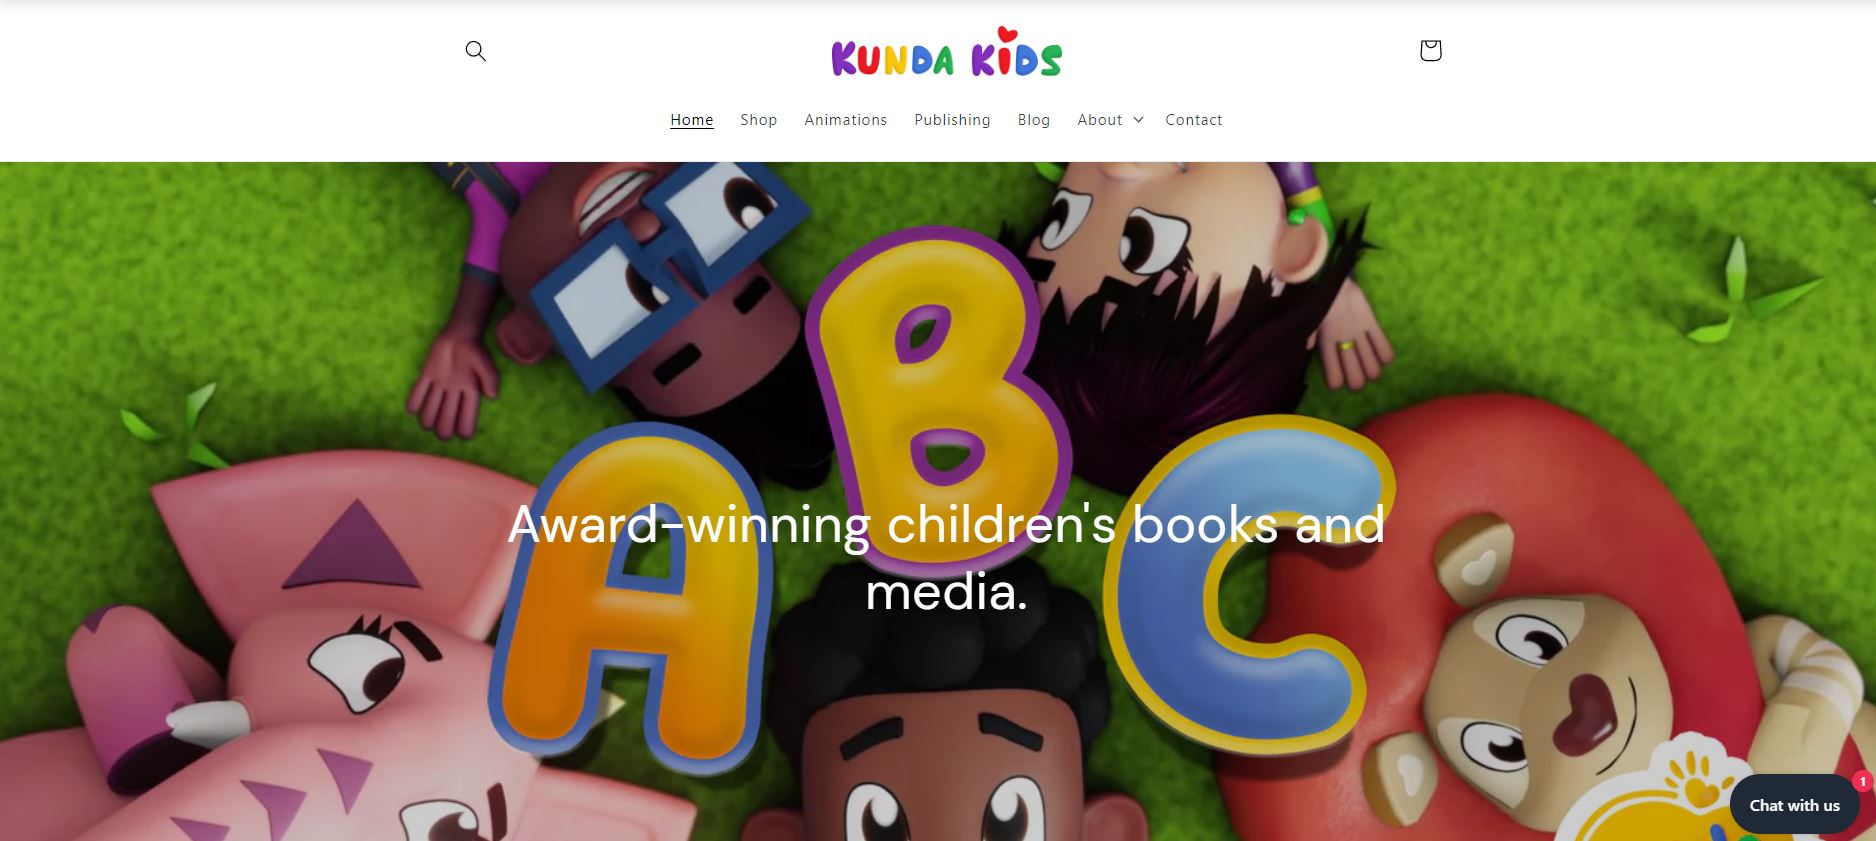 With a remarkable $700K raised in pre-seed funding, Kunda Kids is dedicated to providing inspiring stories that children love